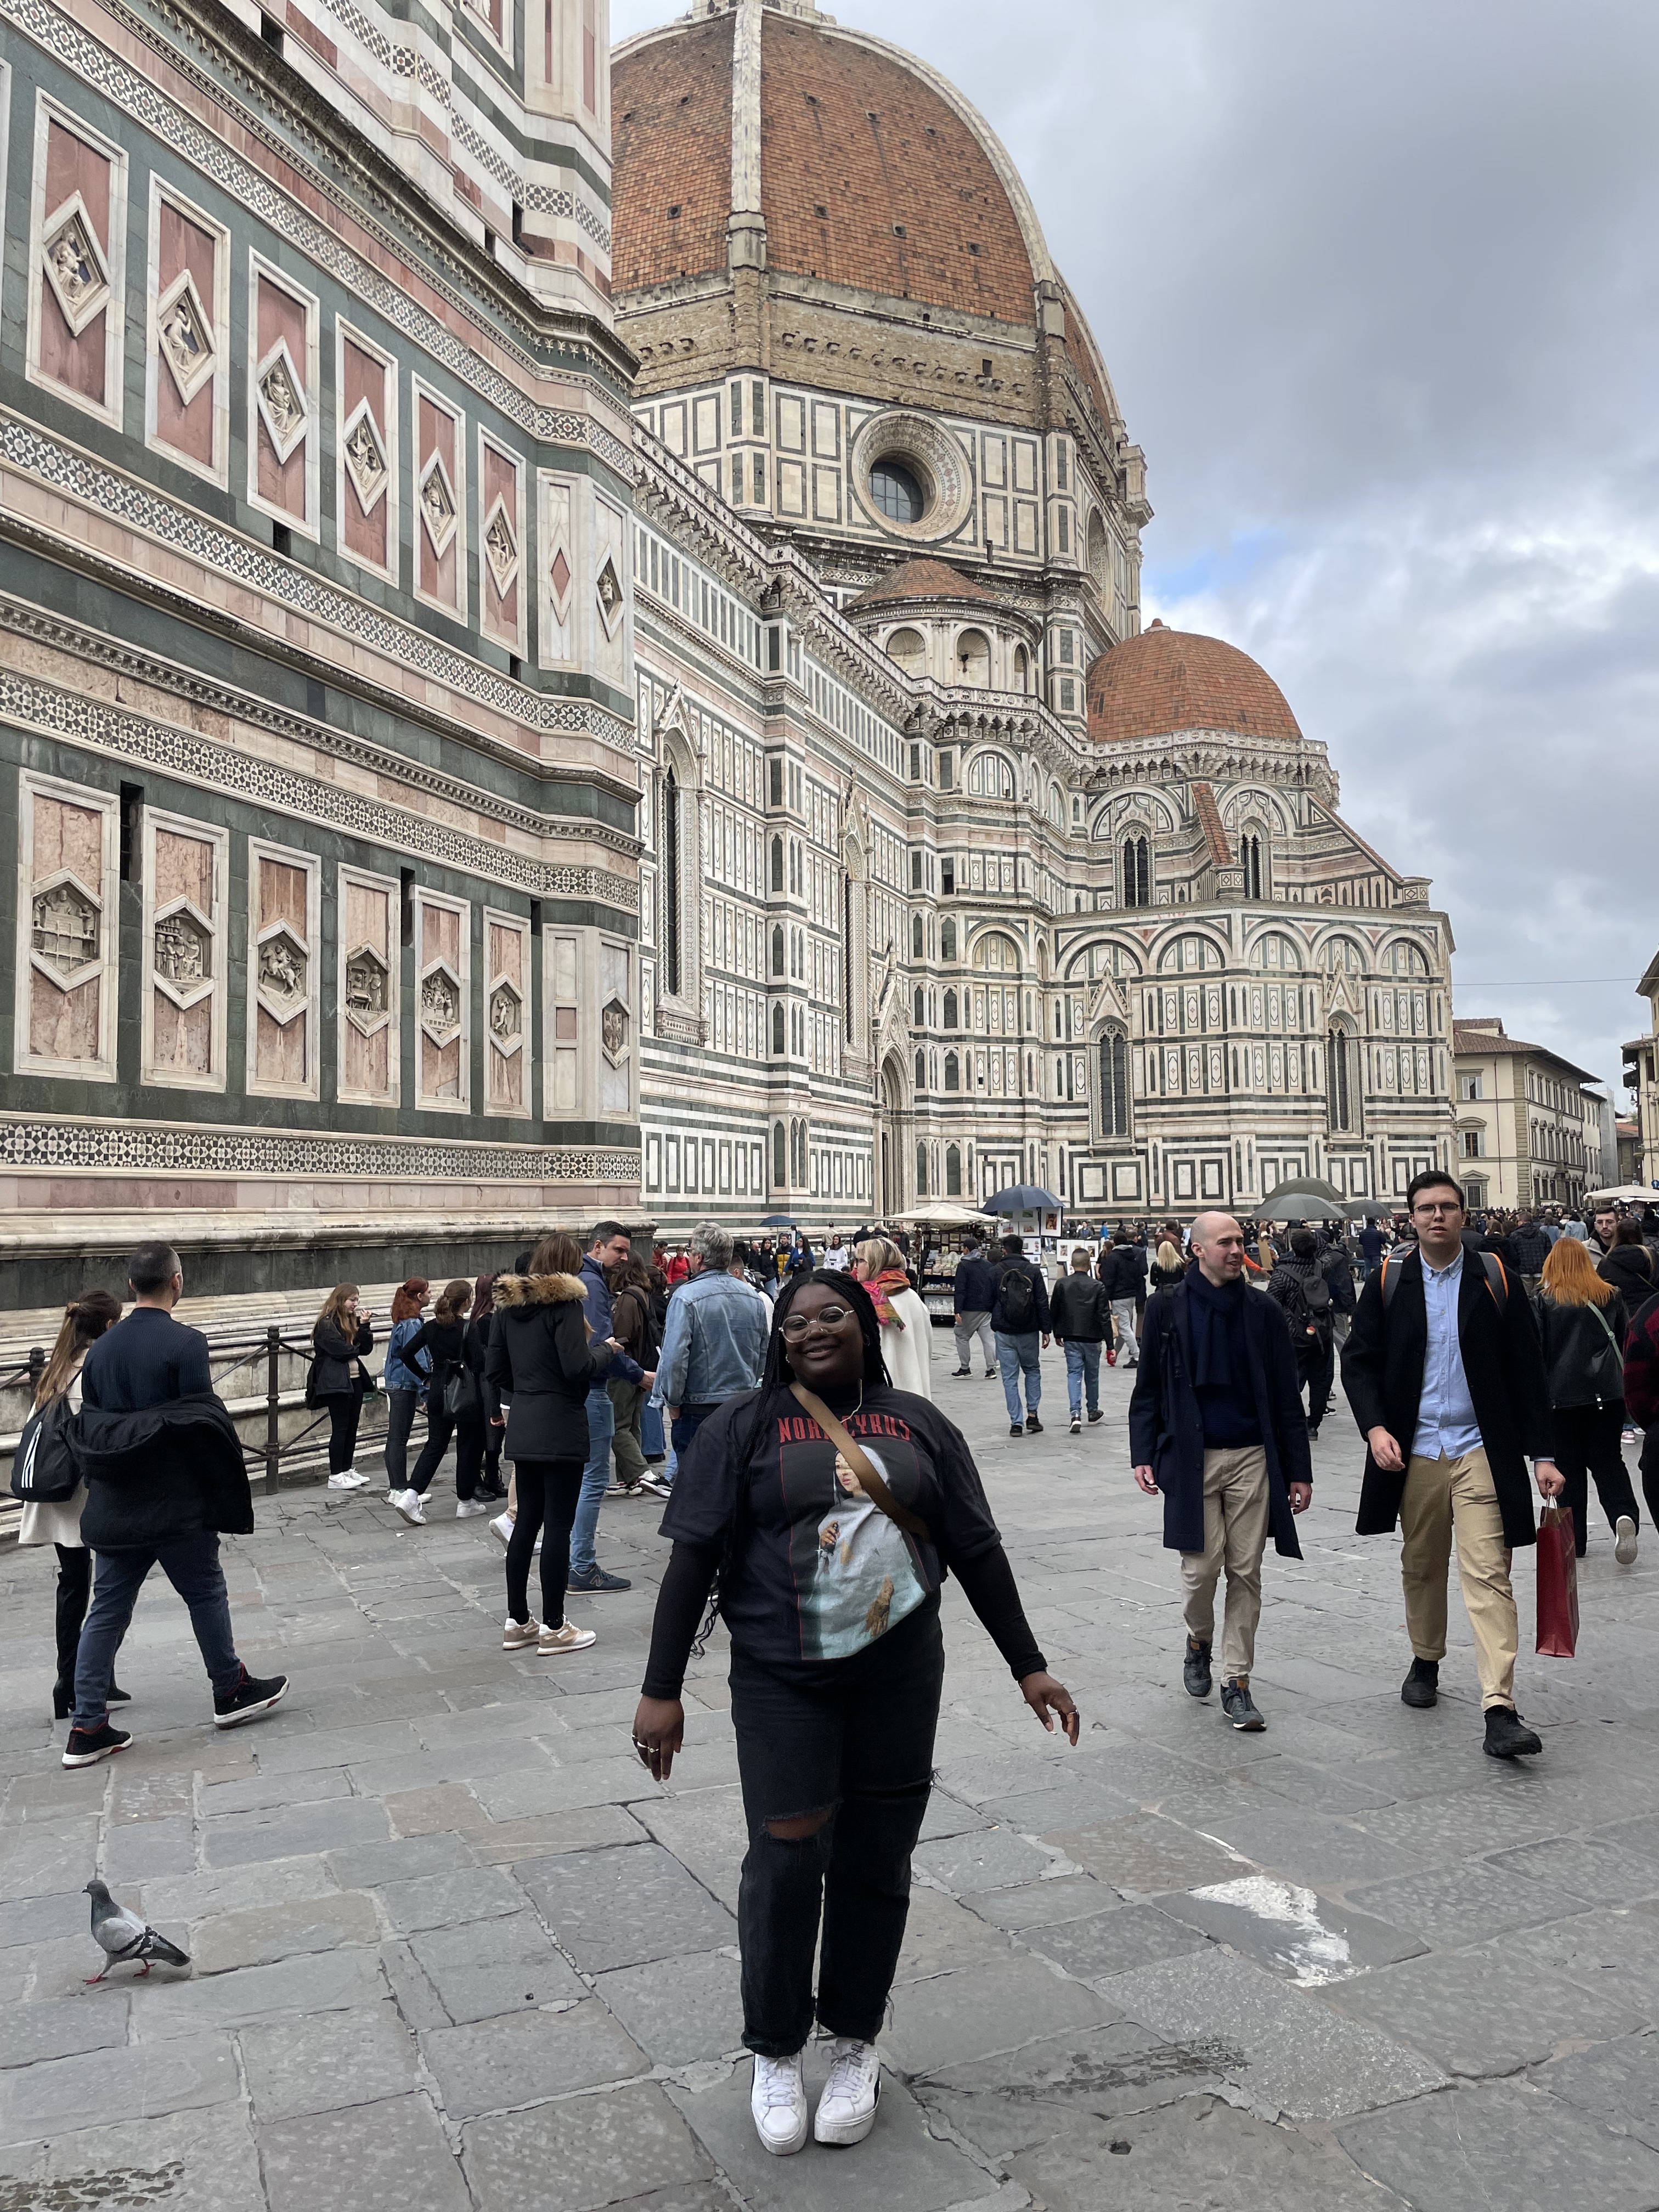 Student posing in front of Duomo in Florence